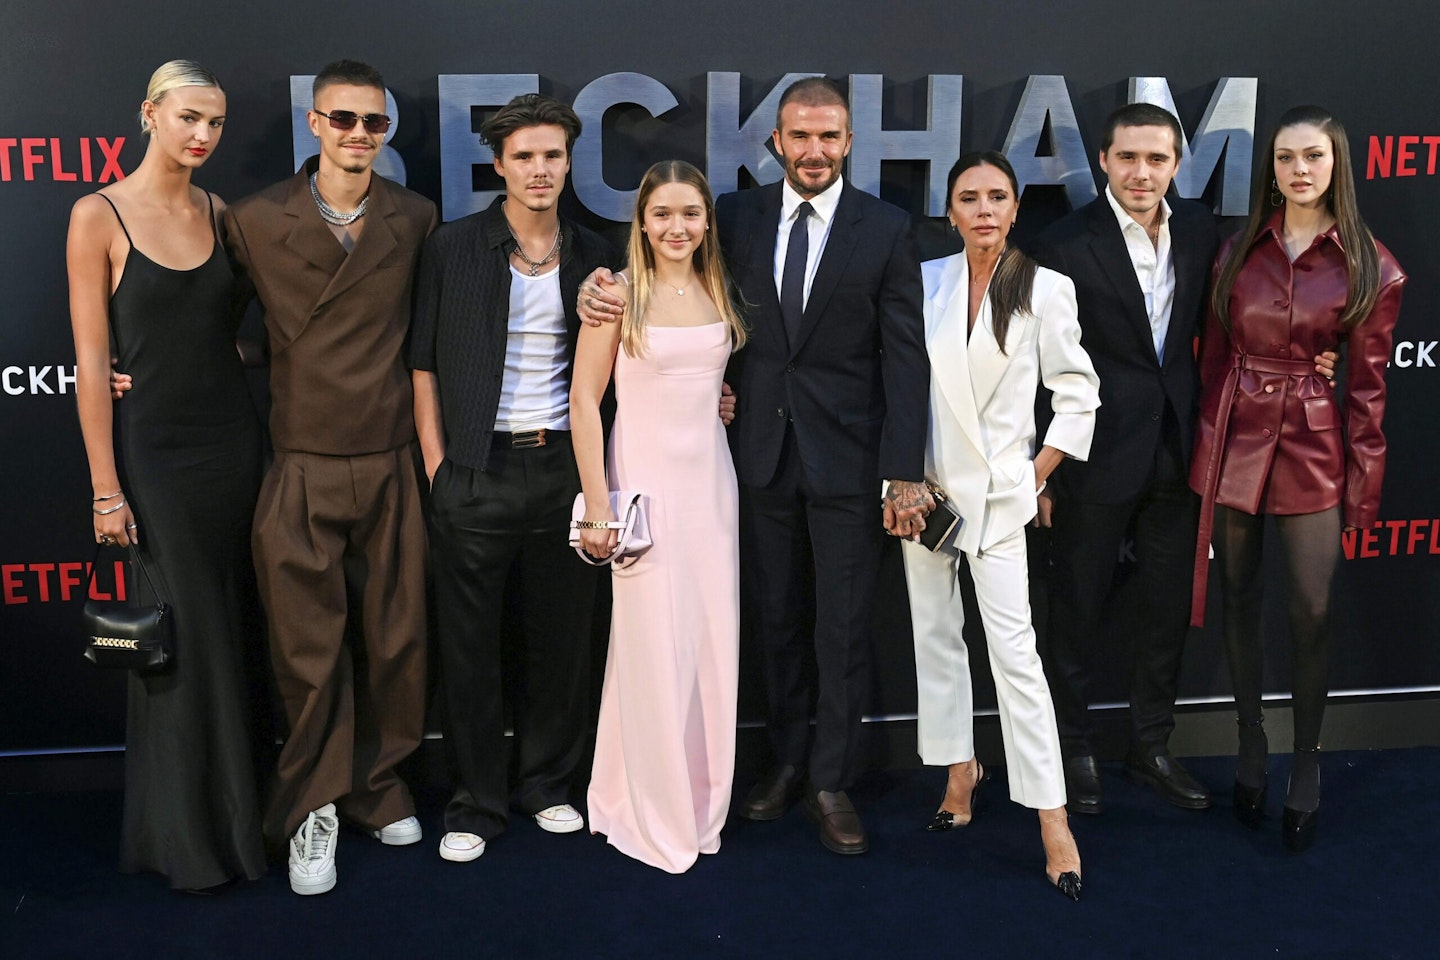 the beckhams unite for the premiere